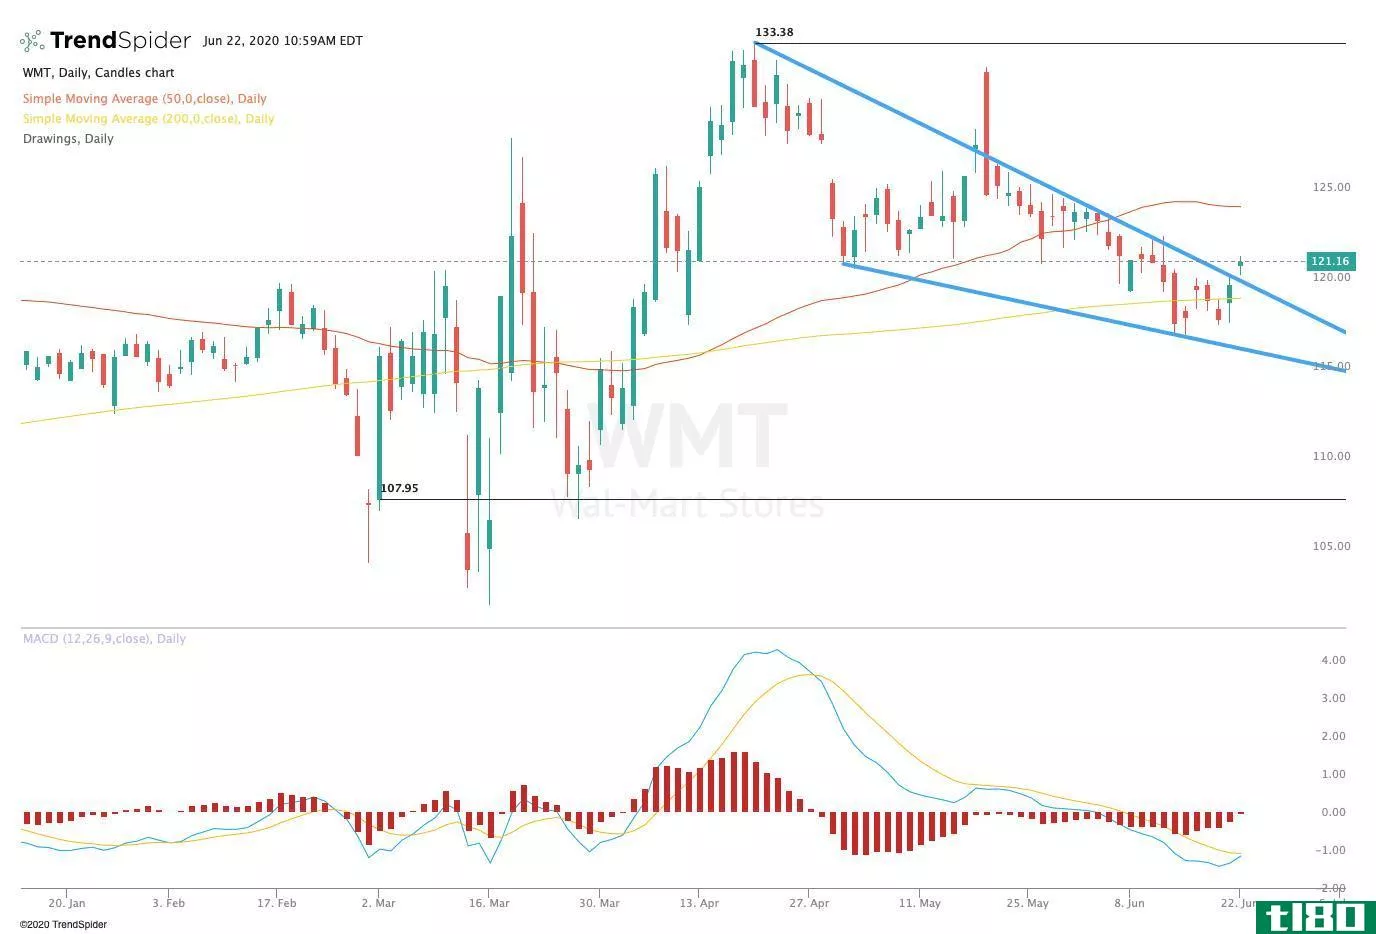 Chart showing the share price performance of Walmart Inc. (WMT)